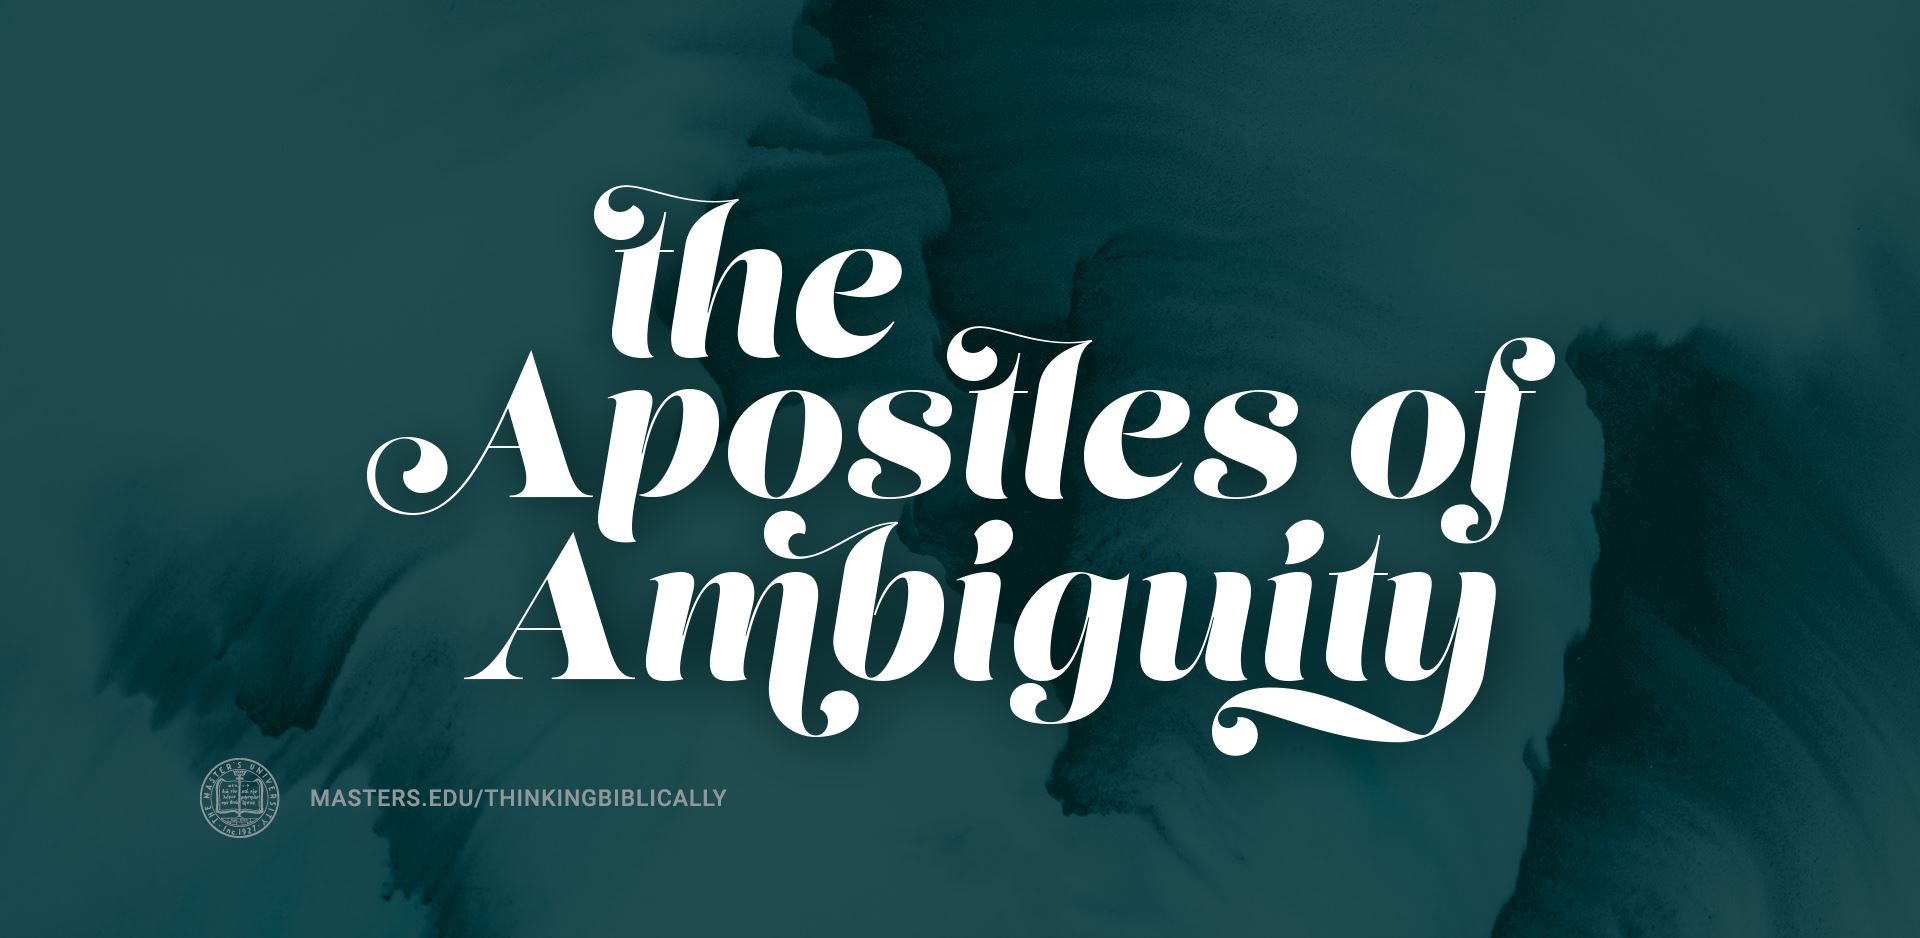 Apostles of Ambiguity Featured Image